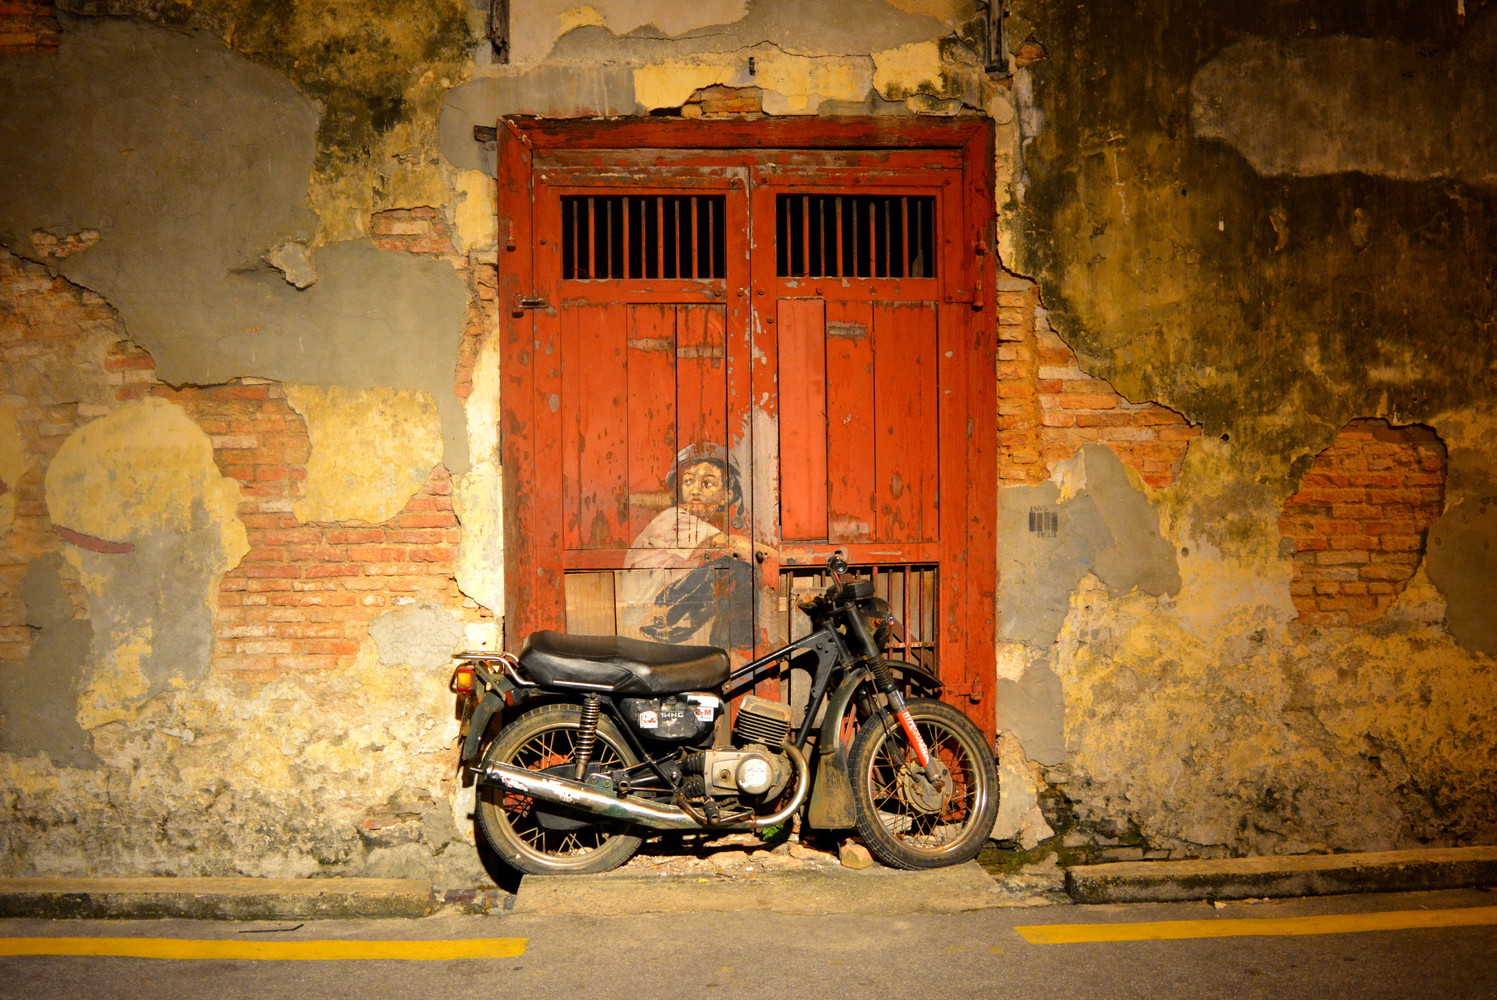 A mural with a boy painted on a door and an actual physical motorcycle attached to the door such that the painted boy appears to be sitting on the motorcycle; the wall around the door is tattered with its paint peeling off